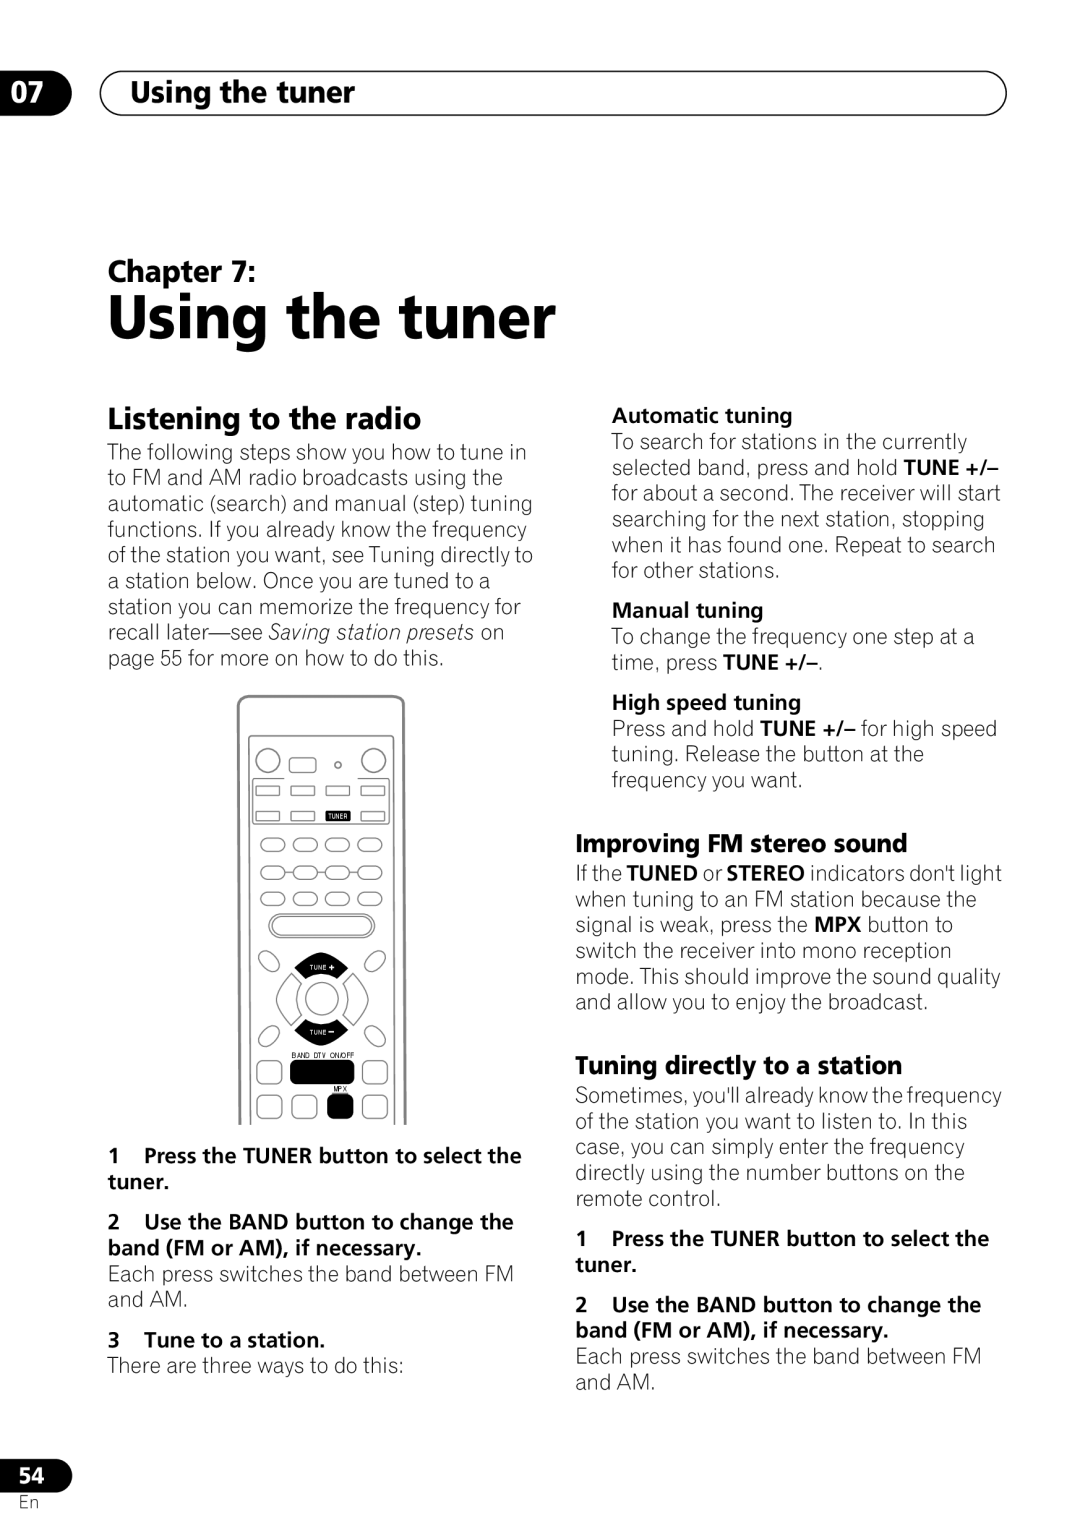 Pioneer VSX-D712 manual 07Using the tuner Chapter, Listening to the radio, Improving FM stereo sound 